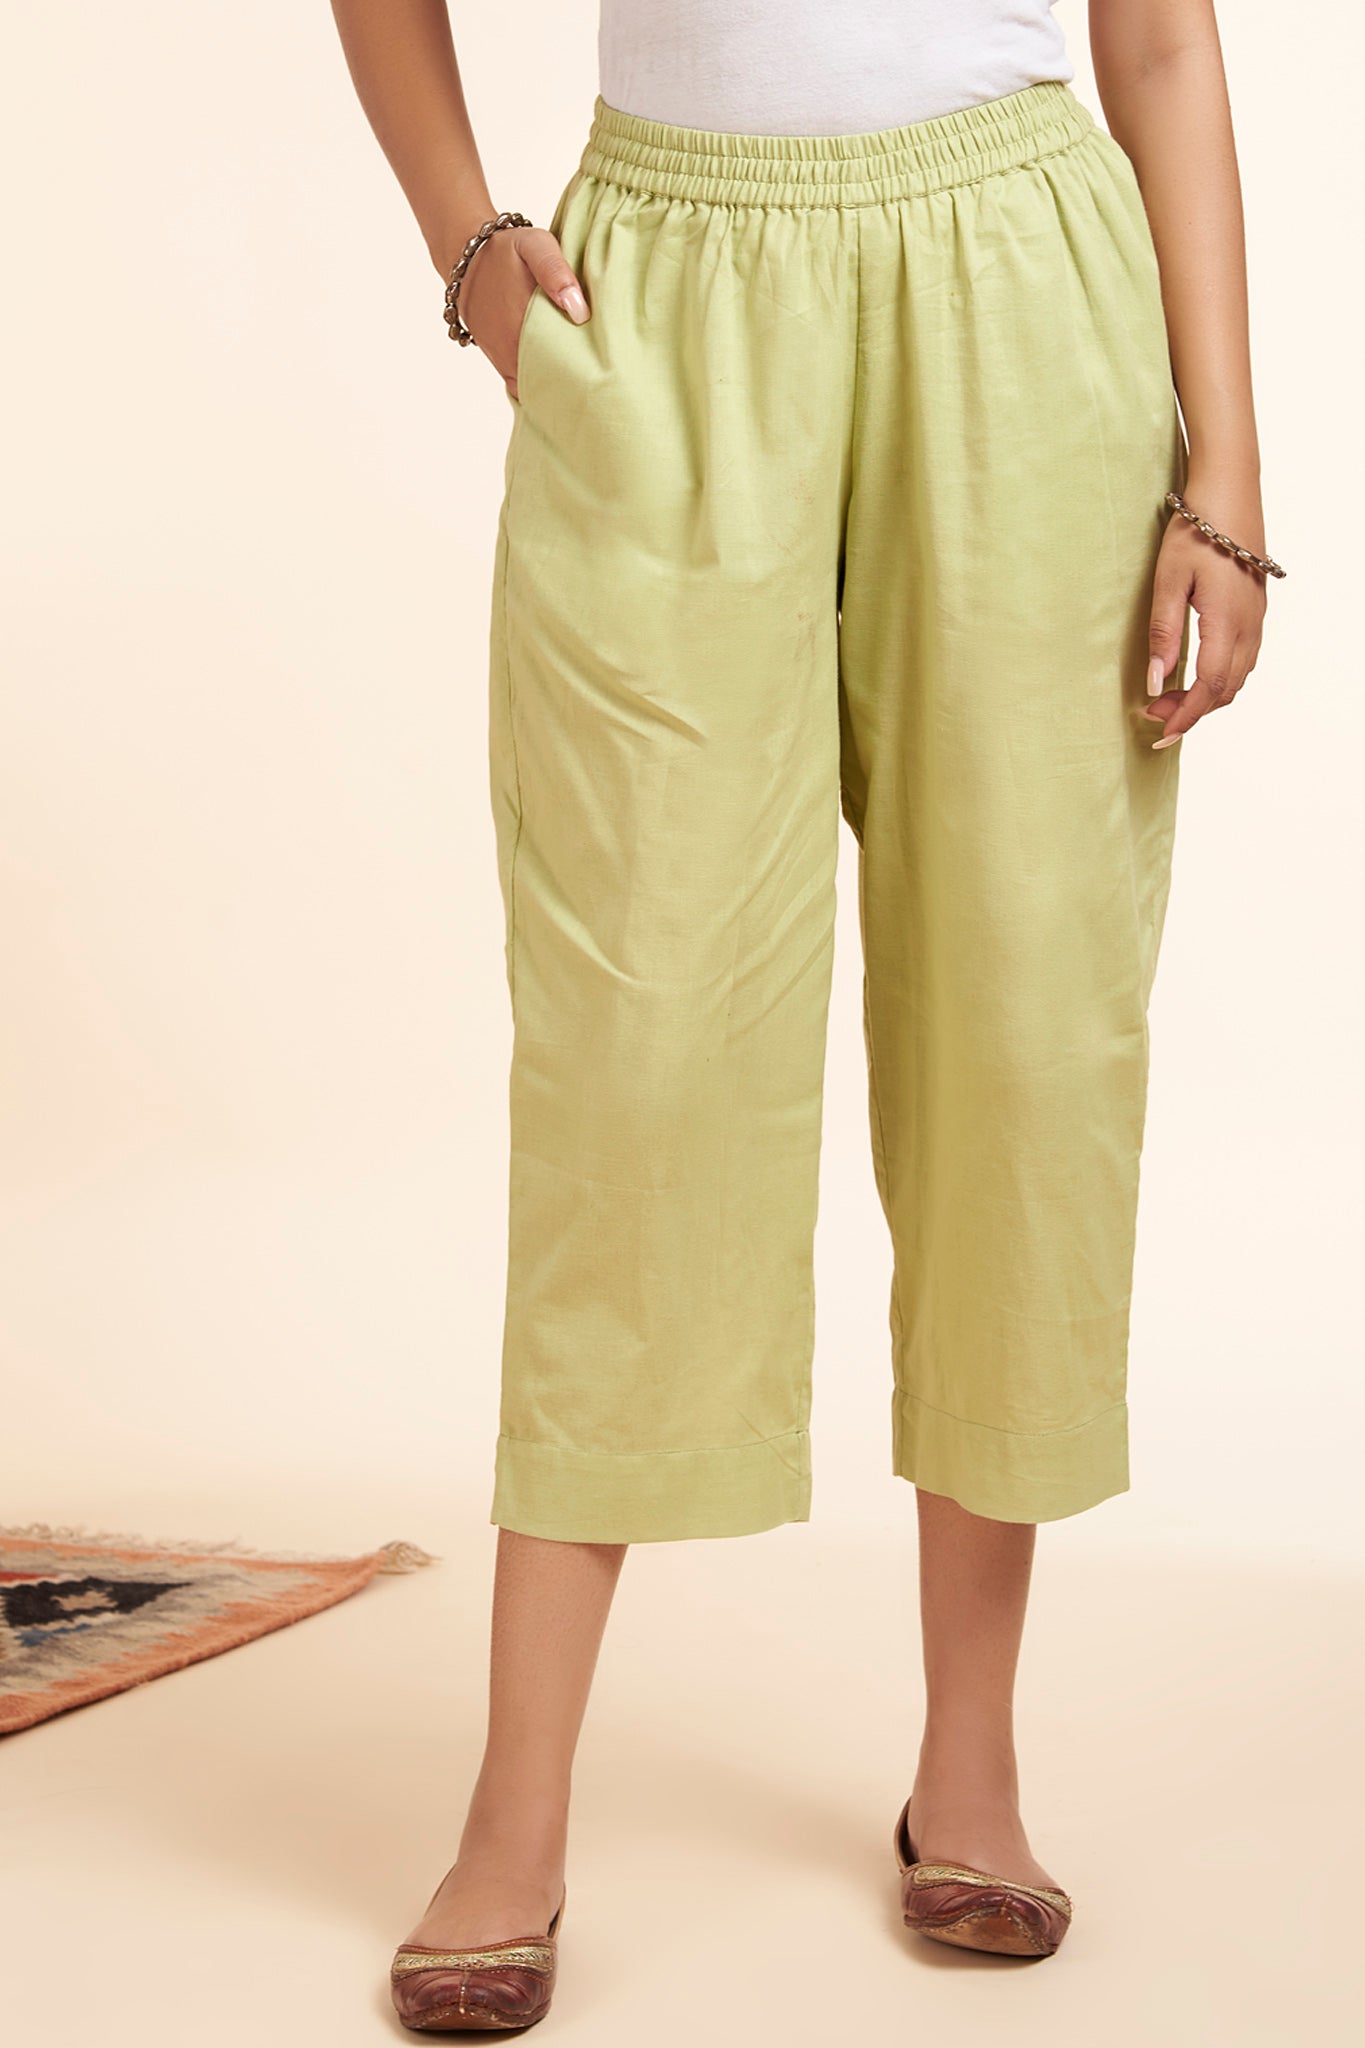 comfort fit ankle length narrow cotton pants - light green - maati